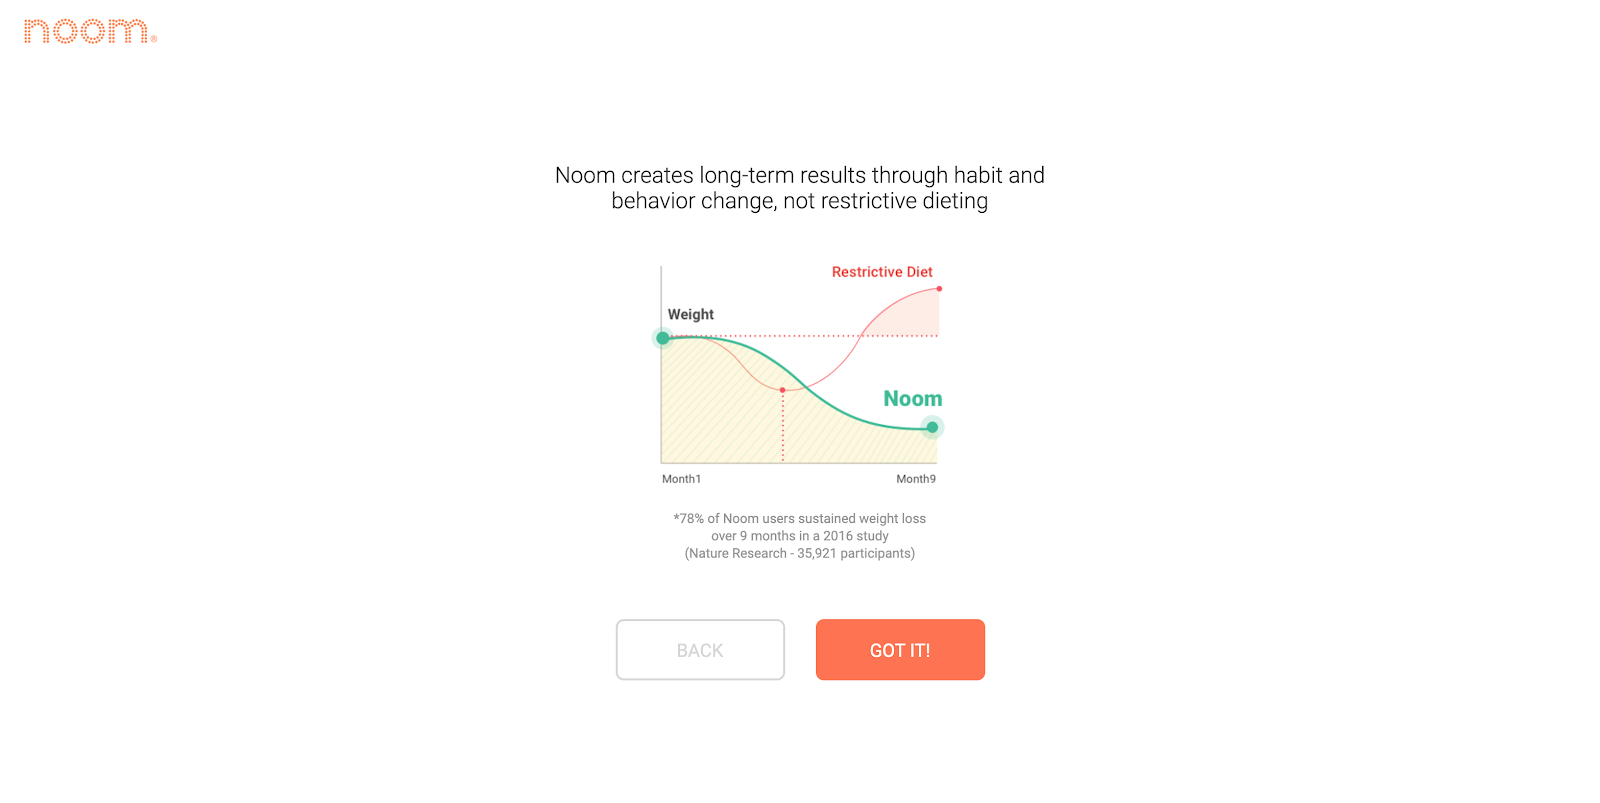 Noom's onboarding sequence